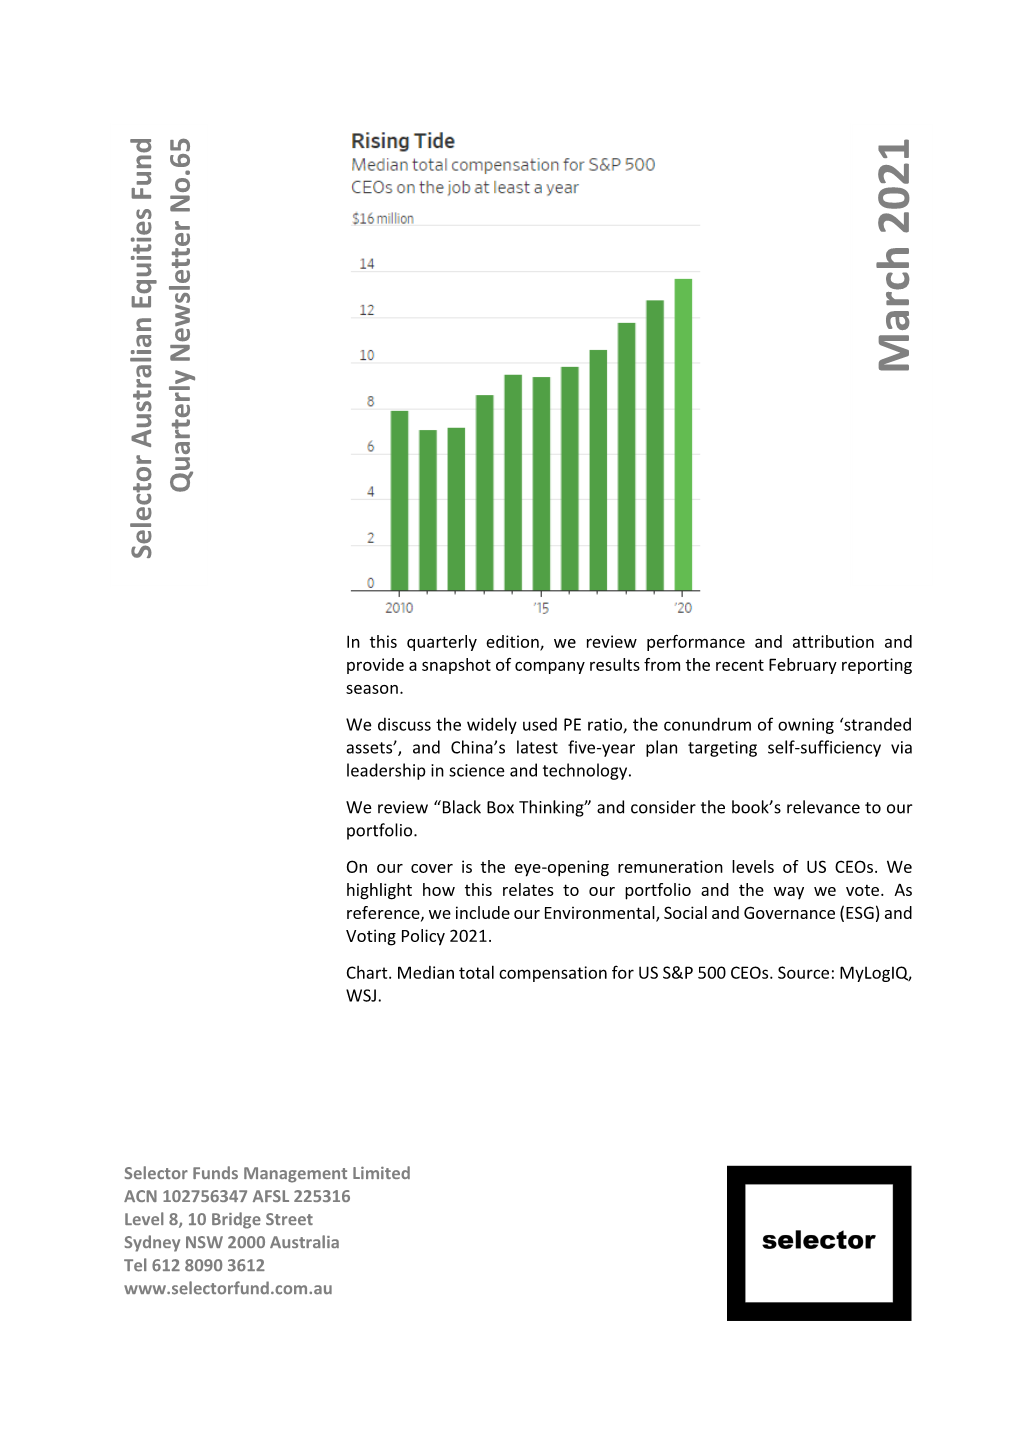 Selector Australian Equities Fund Quarterly Newsletter No.65